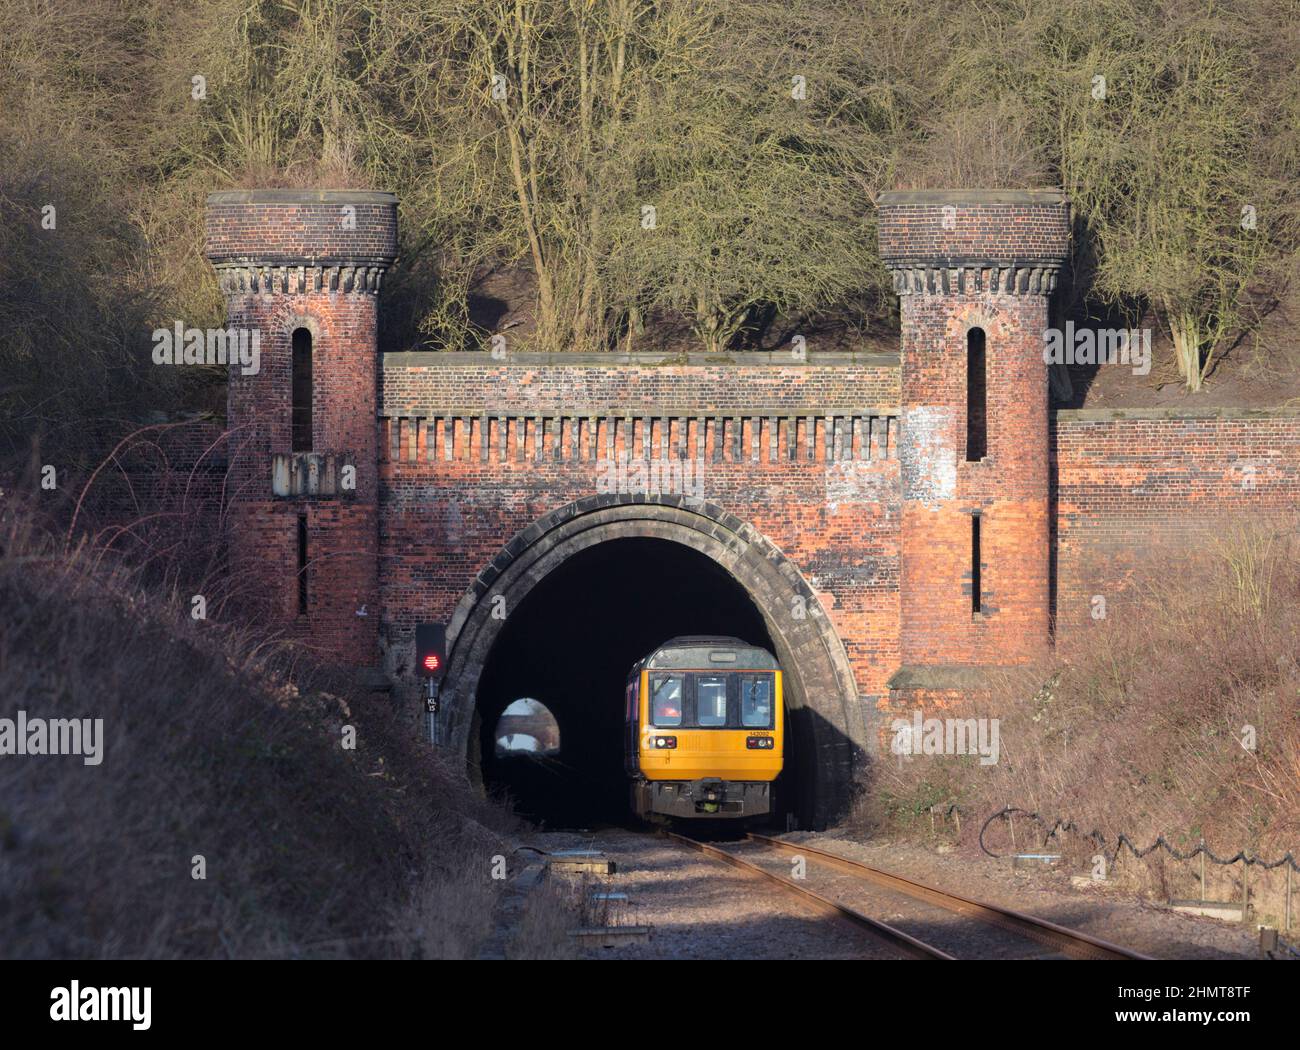 Northern rail class 142 pacer train 142092 leaving Kirton Lindsey tunnel on the Brigg line, Lincolnshire Stock Photo